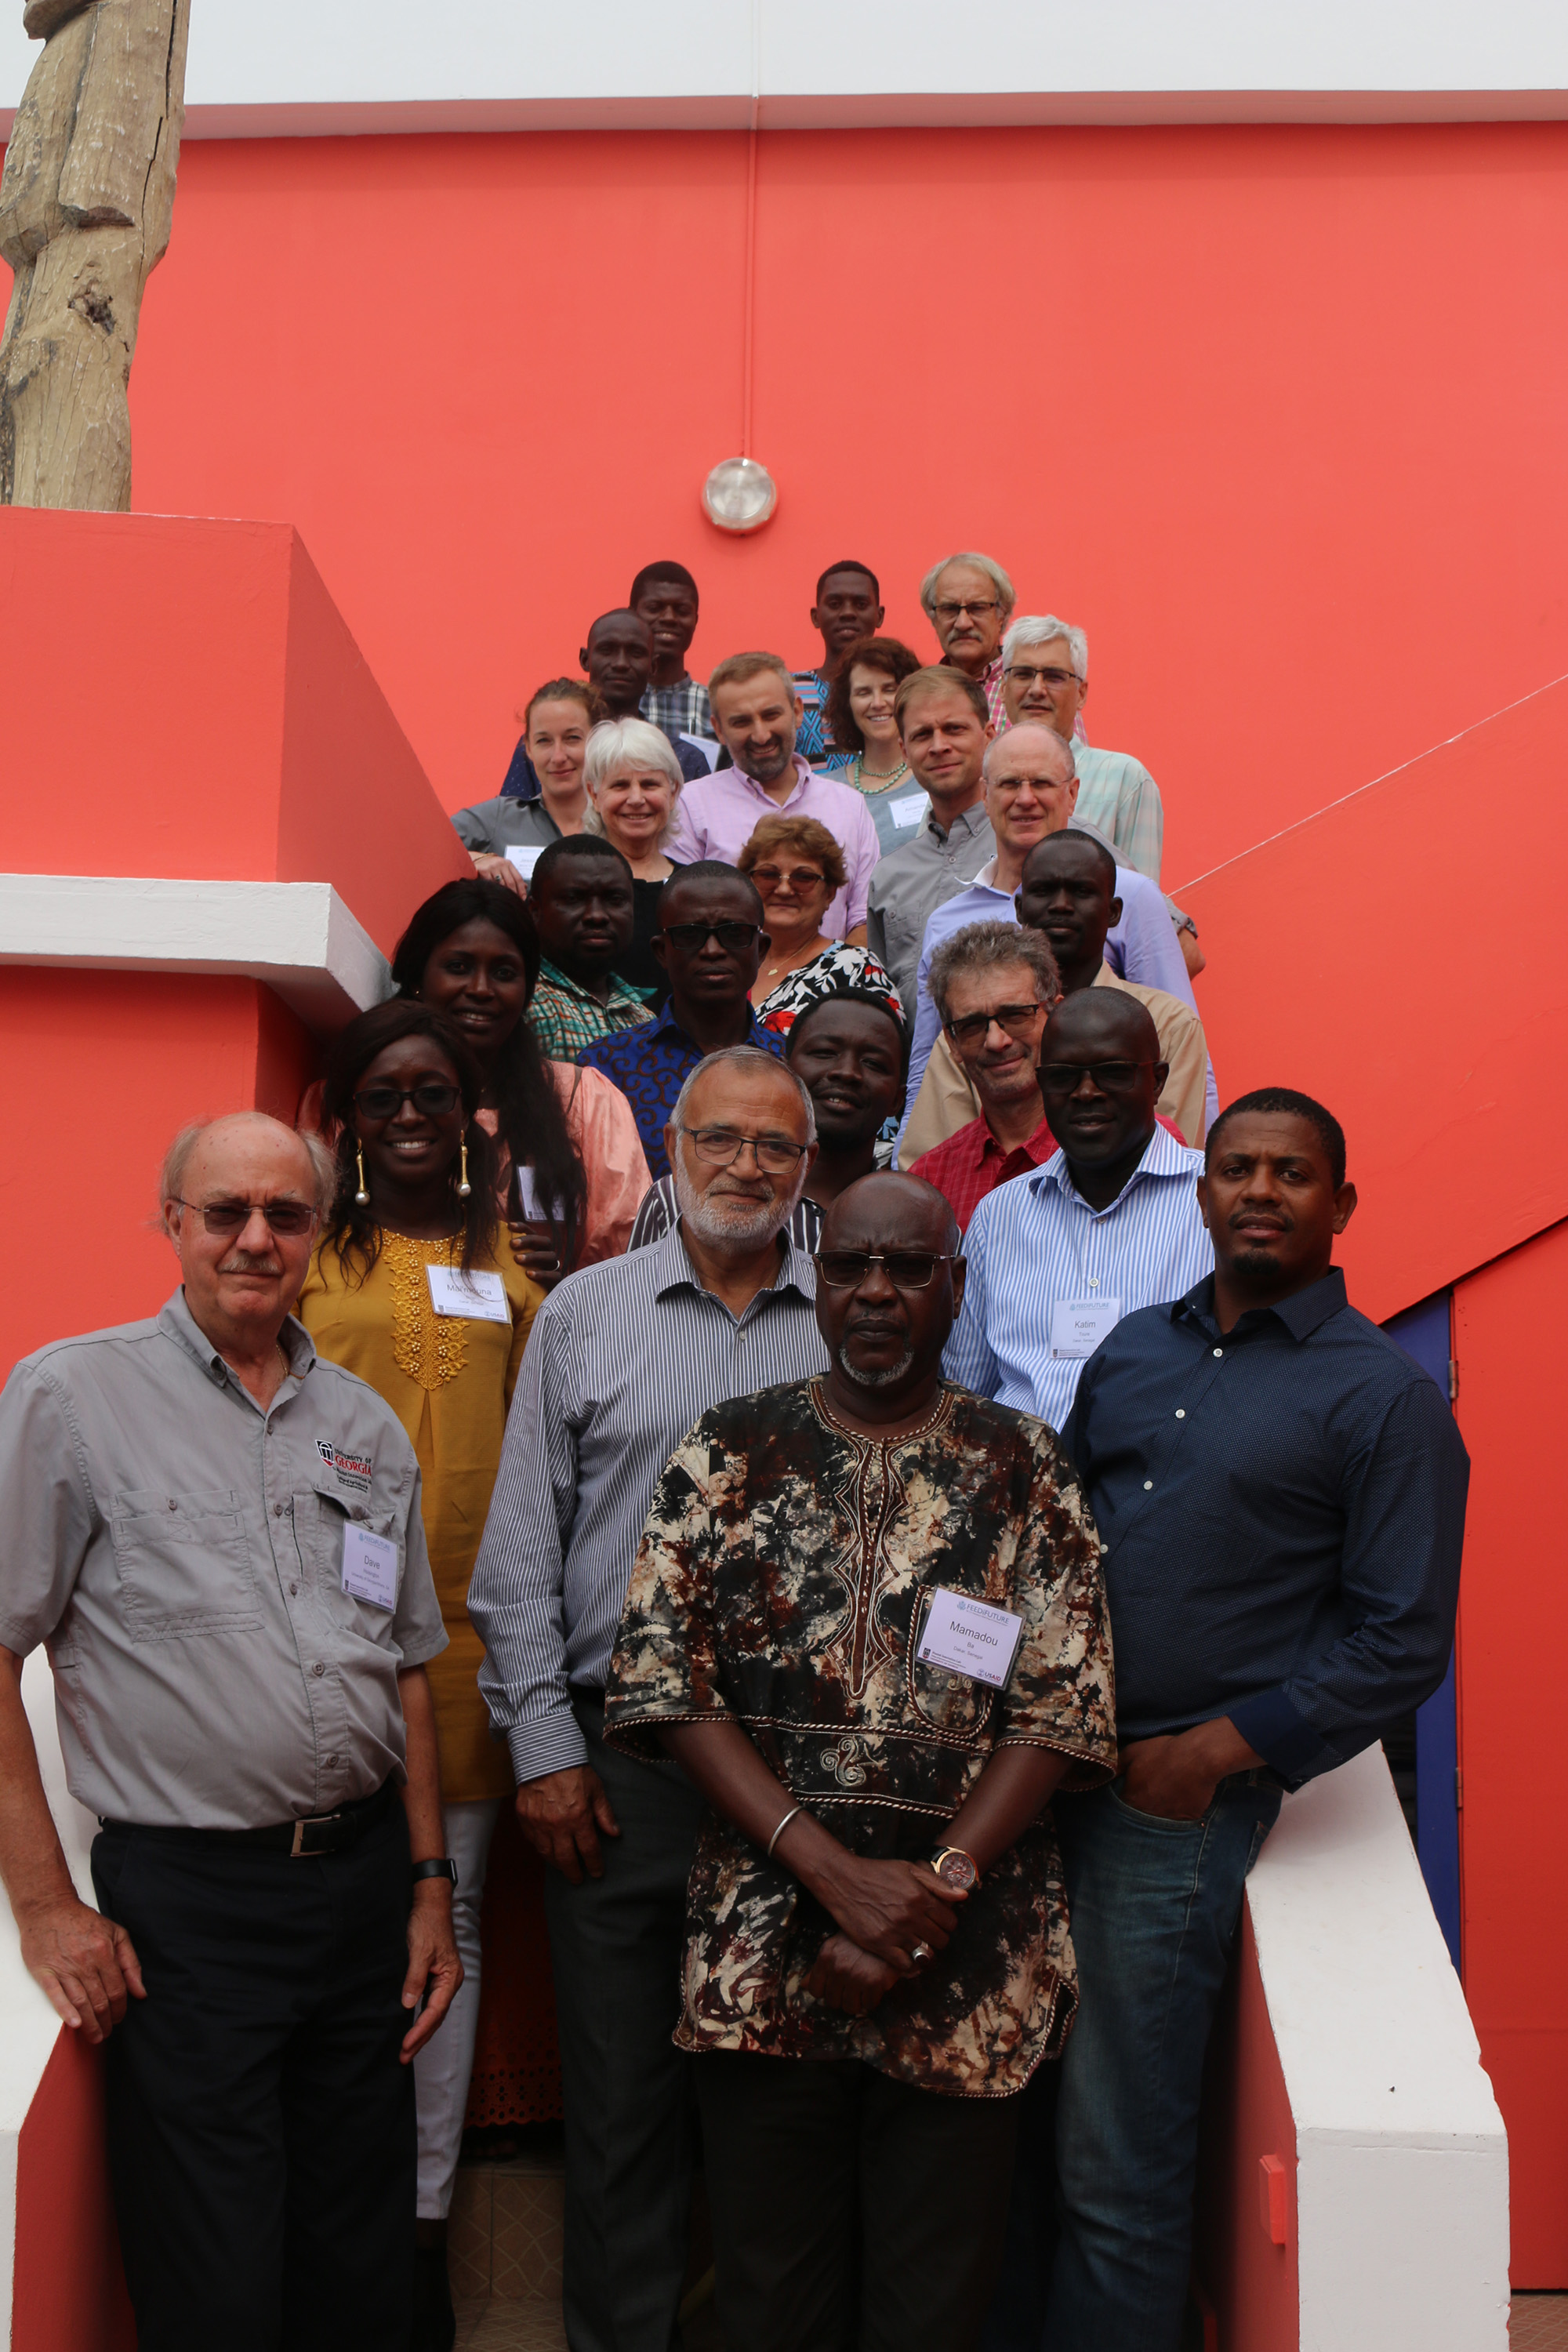 The Peanut Innovation Lab at the University of Georgia hosted a meeting in Dakar, Senegal in October for researchers from the U.S. and Western Africa working together on research in the areas of peanut variety development, value chain improvements and empowering women and youth. (Photo by Allison Floyd)